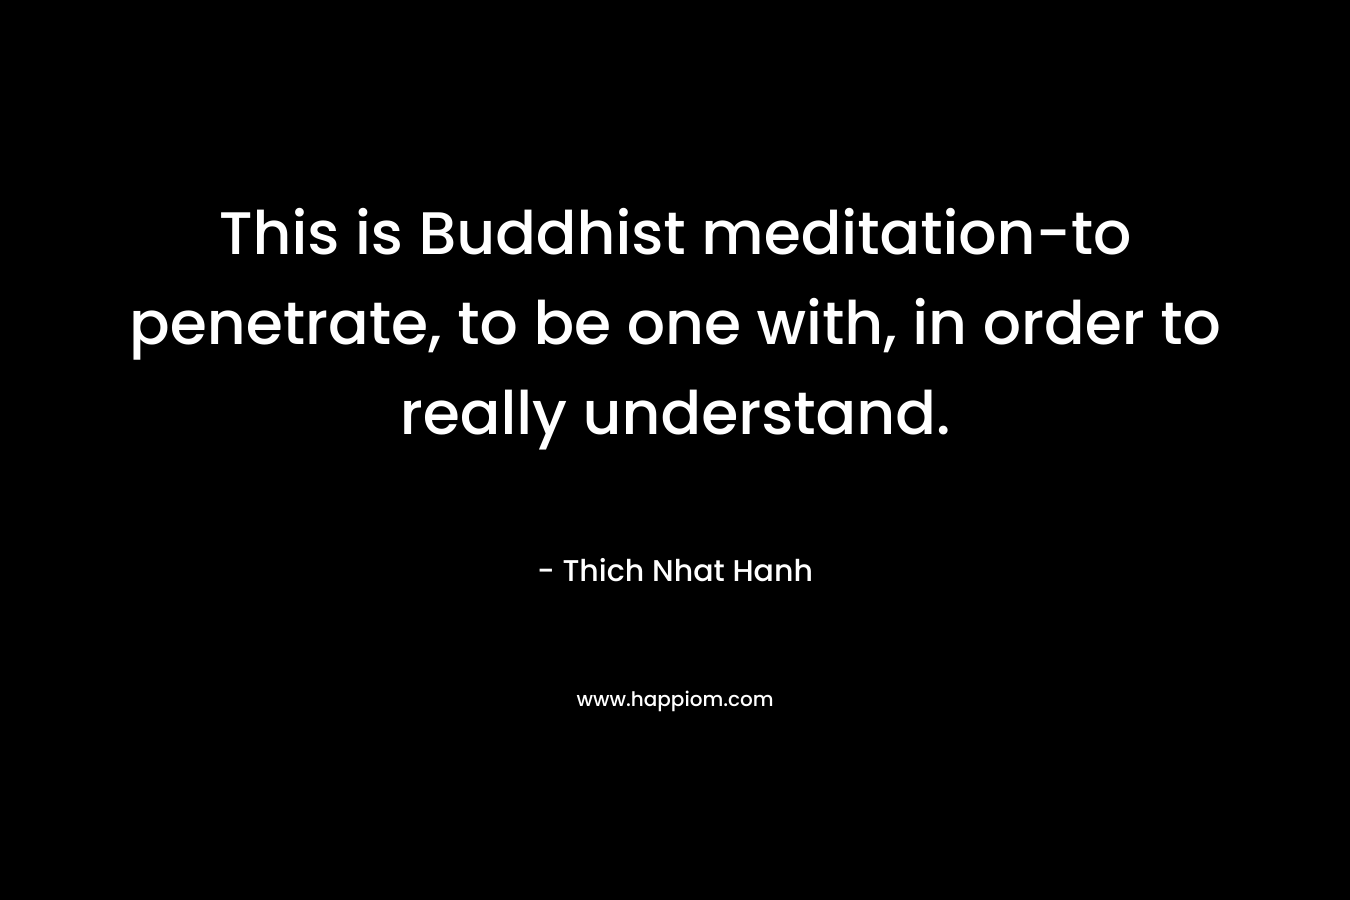 This is Buddhist meditation-to penetrate, to be one with, in order to really understand. – Thich Nhat Hanh